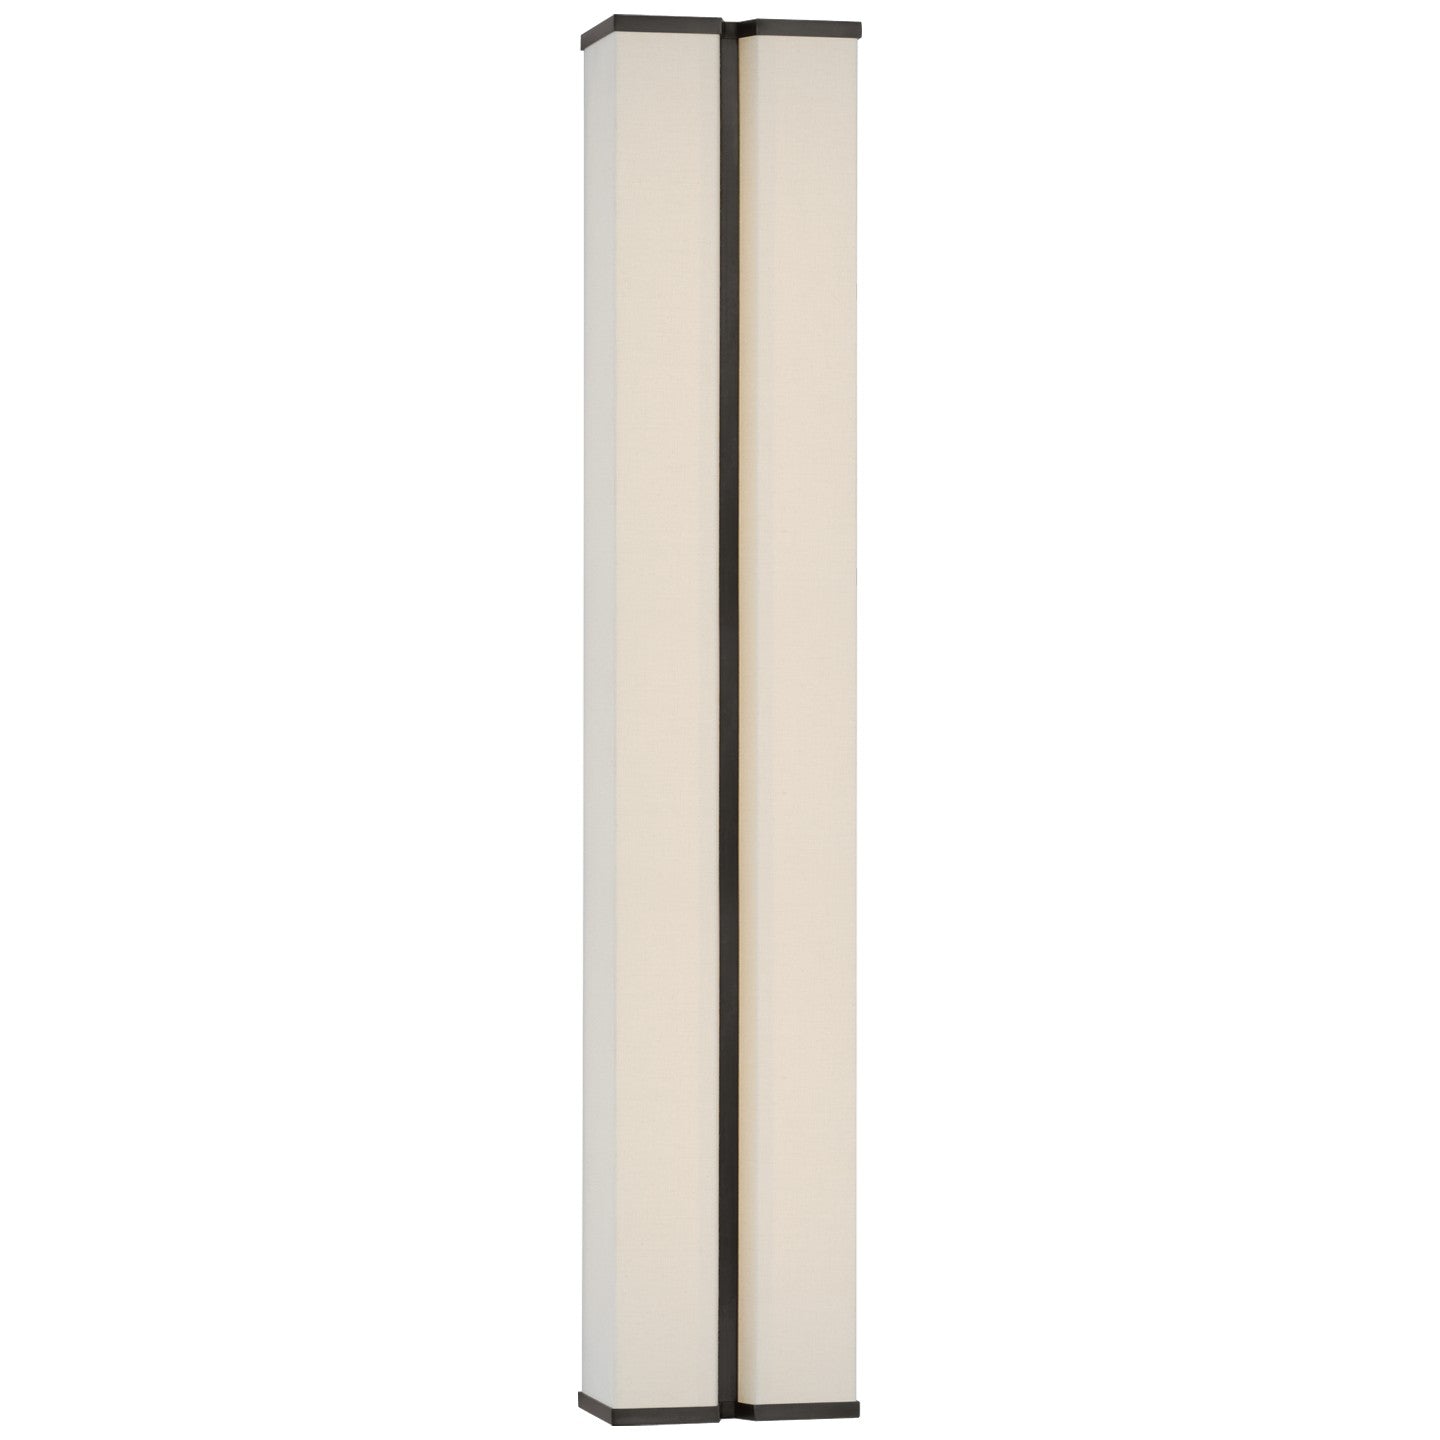 Visual Comfort Signature - PCD 2252BZ/L - LED Wall Sconce - Vernet - Bronze and Linen